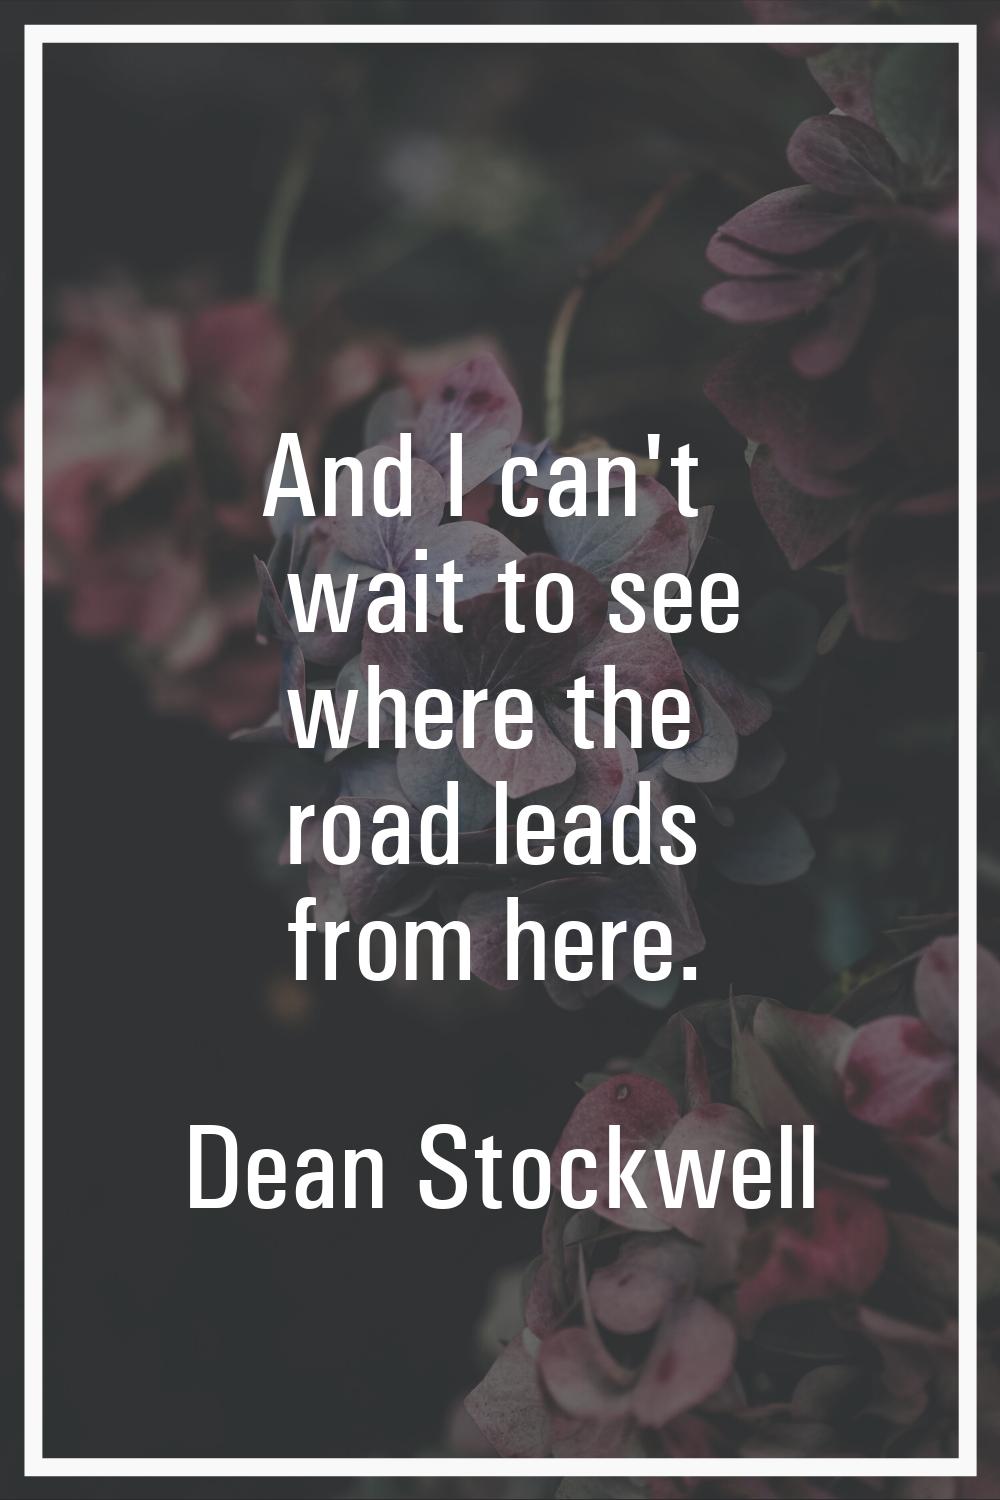 And I can't wait to see where the road leads from here.